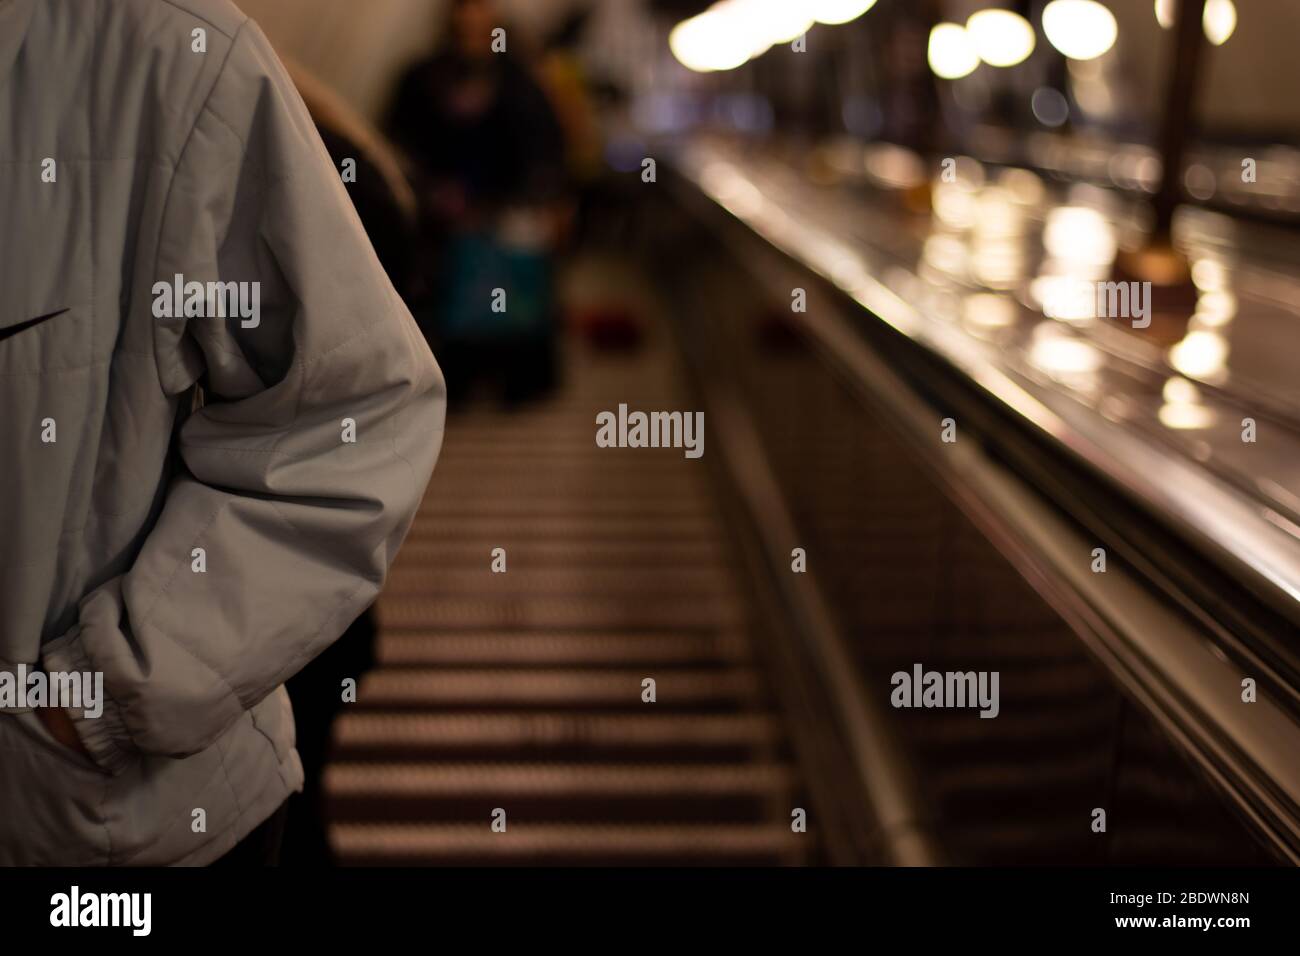 The body of a man in a jacket on an escalator in the subway with copy space. Low light with blurry background Stock Photo